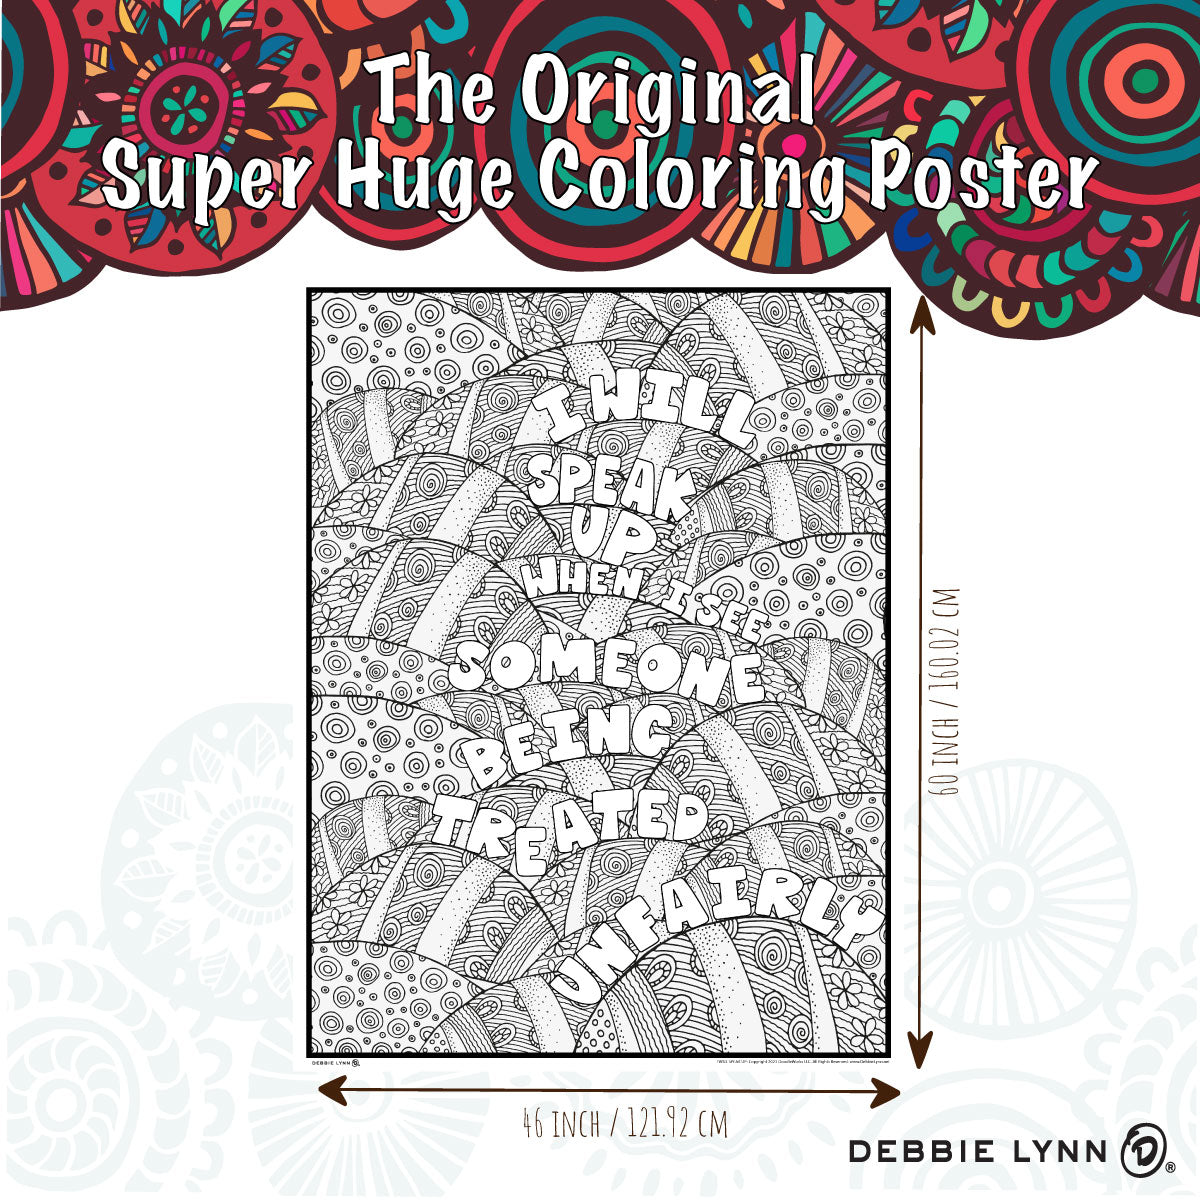 15 coloring books plus about 300 digital coloring pages and digital stamps!  : r/Coloring